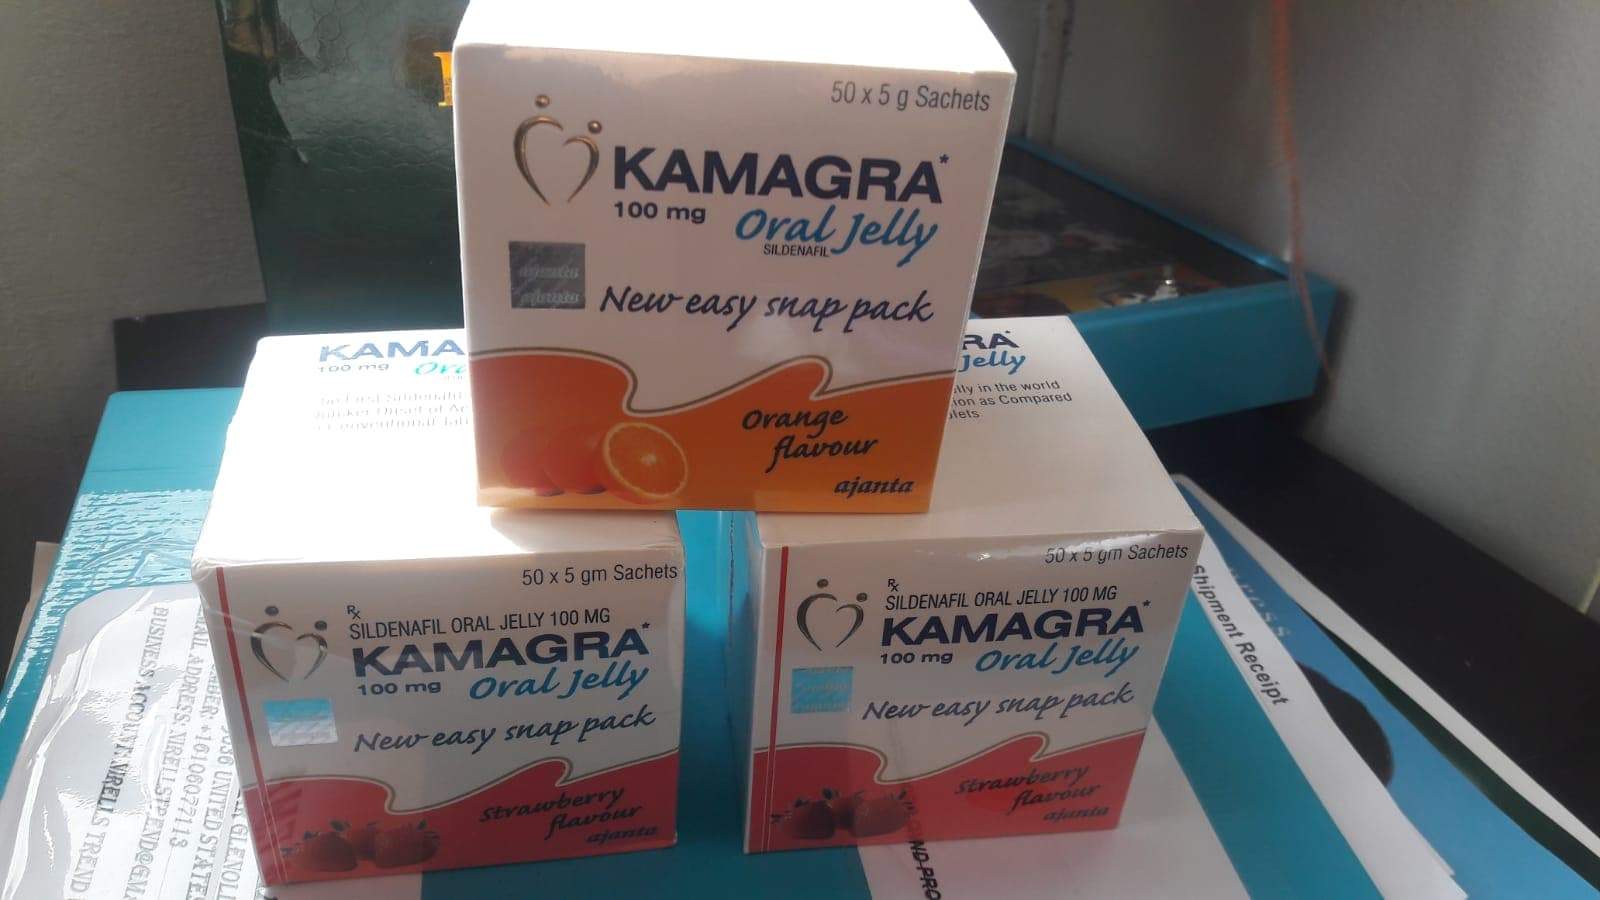 Little Identified Ways To Rid Yourself Of Kamagra Oral Jelly